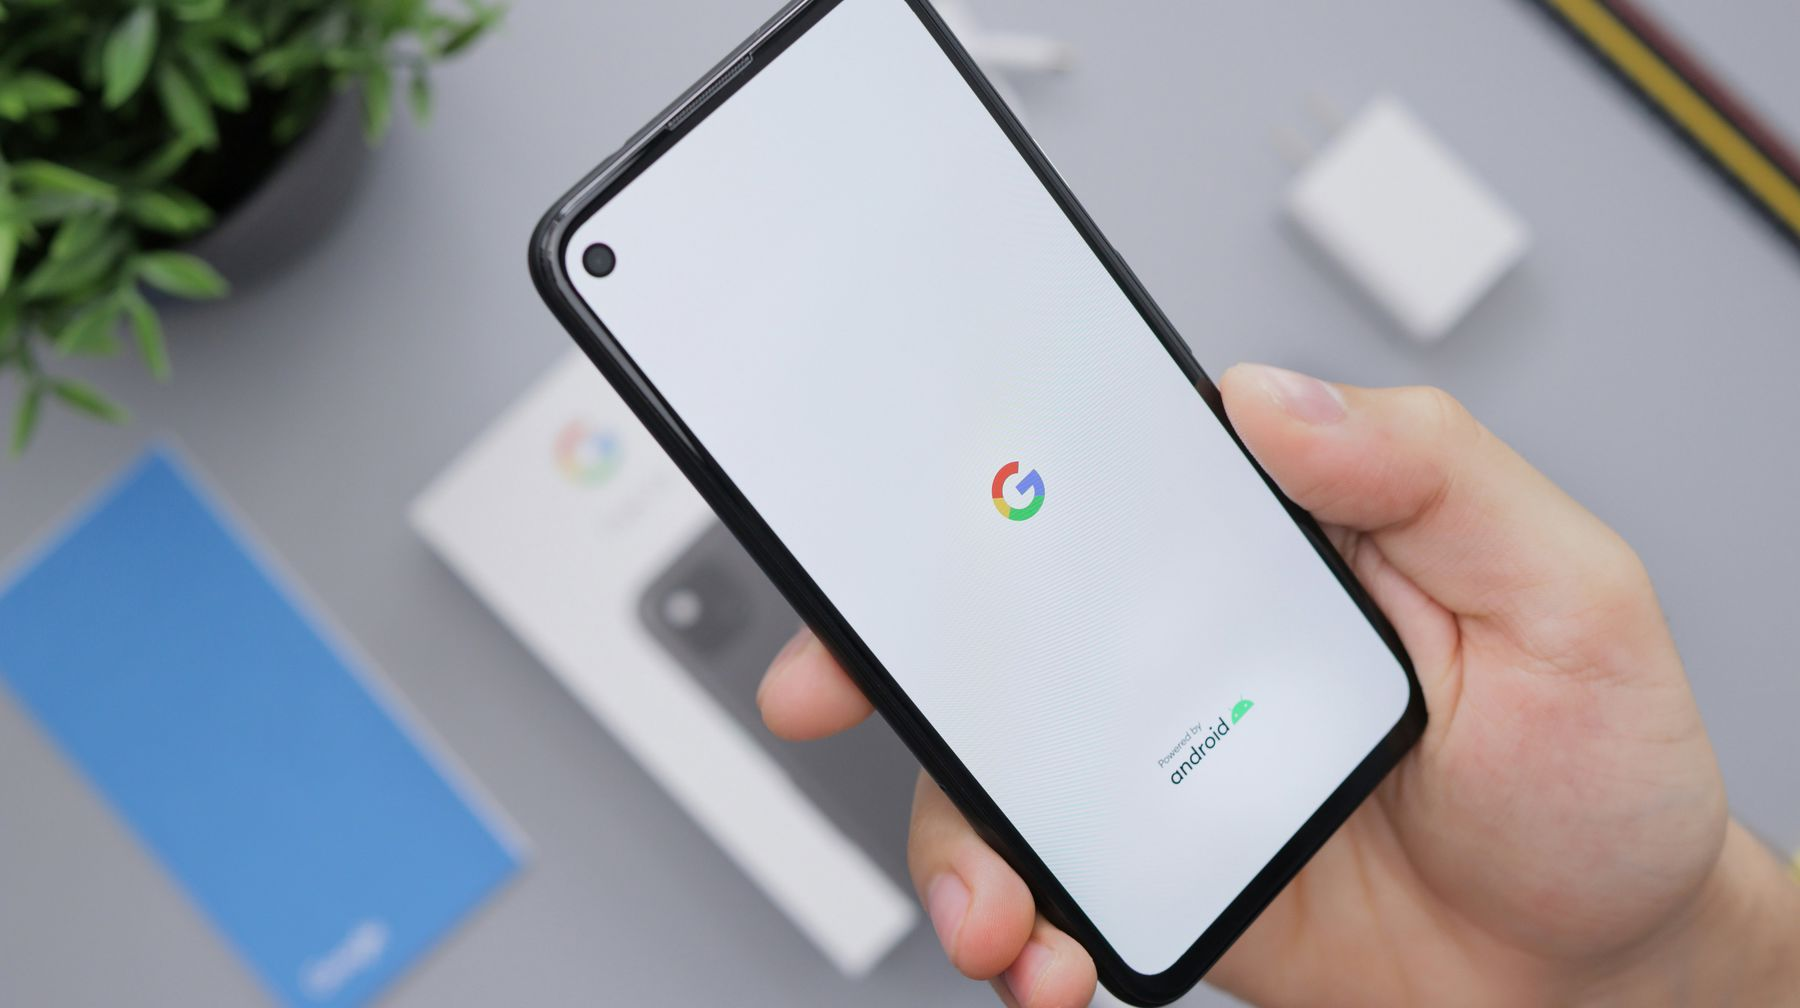 Hand holding a smartphone with the Google app loading